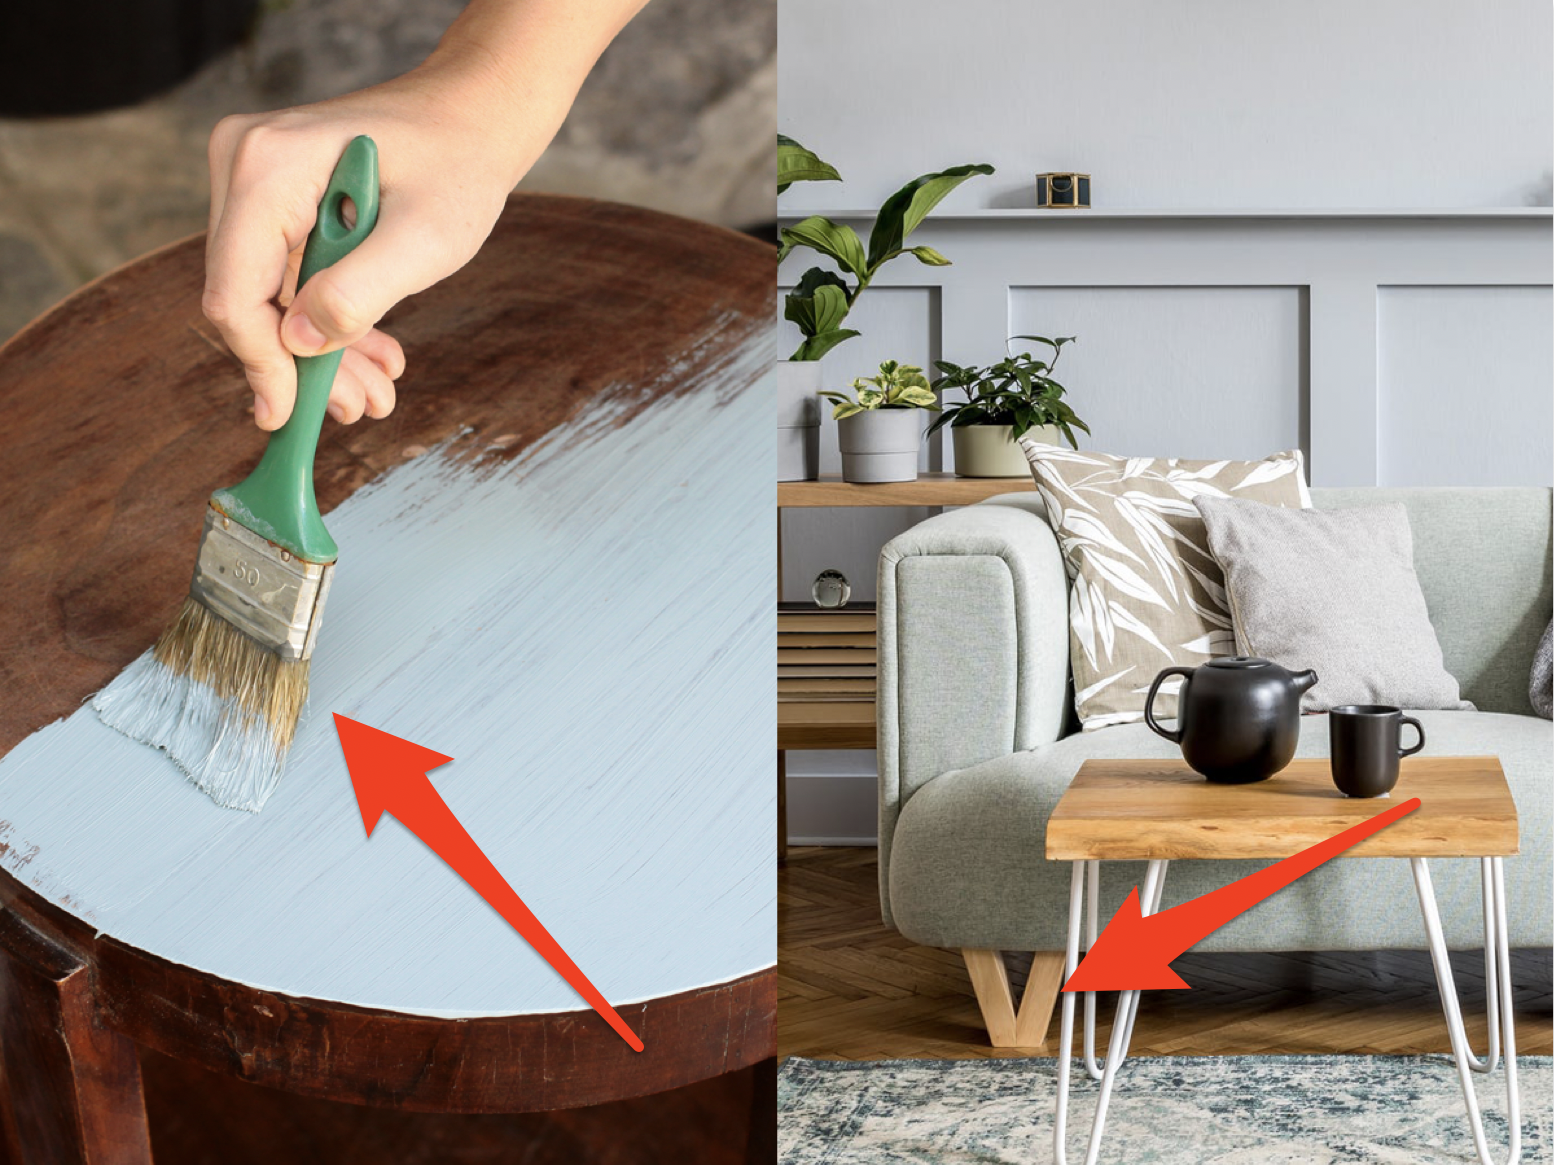 (left) red arrow pointing to hand painting a wooden table blue, (left) red arrow pointing to interesting legs on gray couch